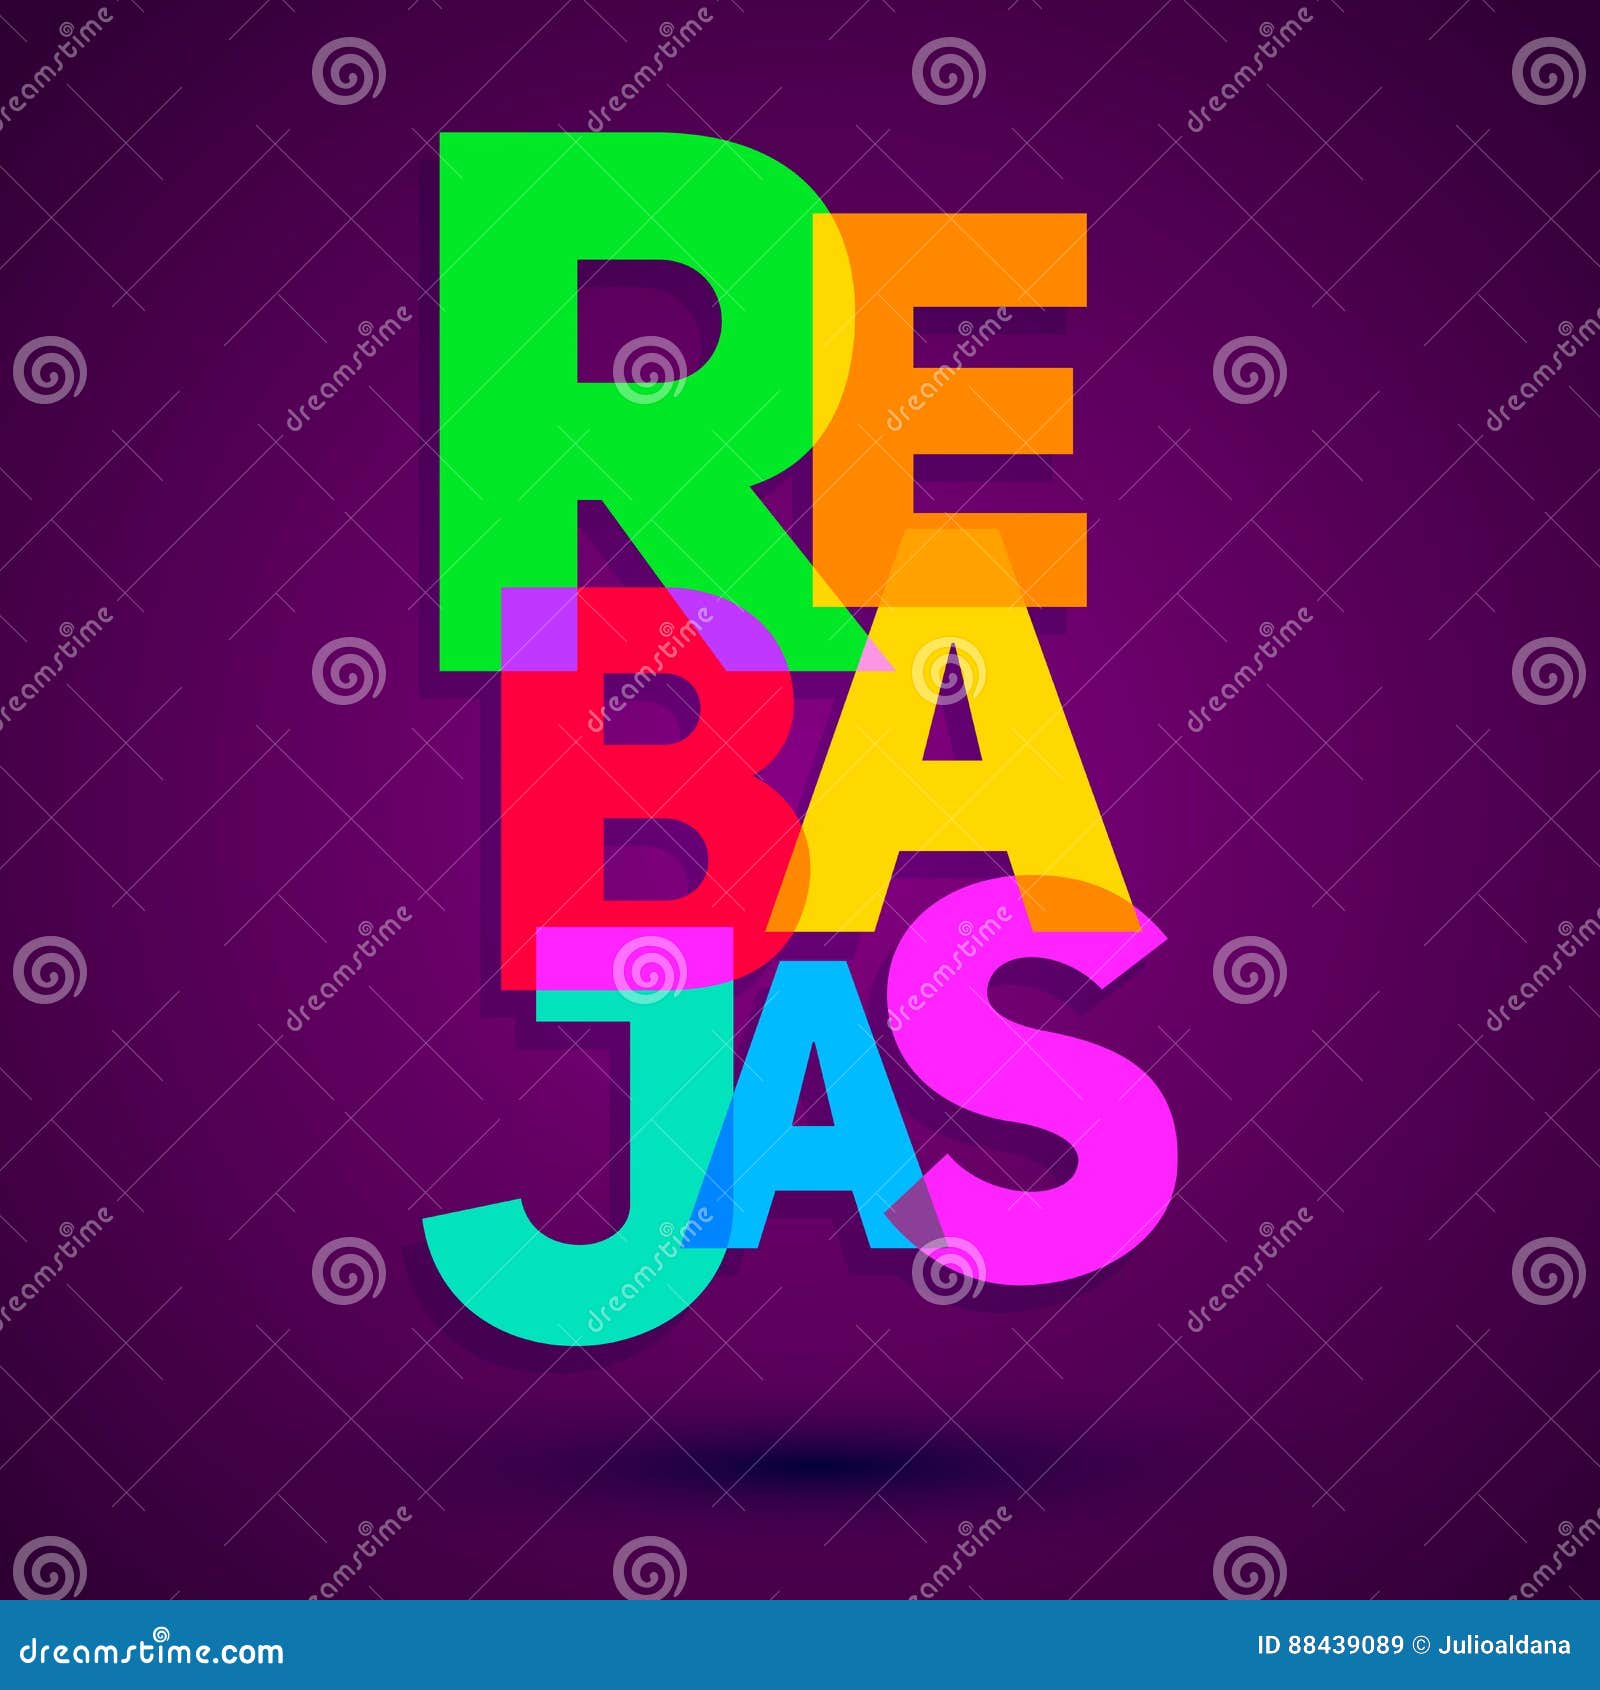 rebajas - discounts spanish text, sales  colorful lettering 